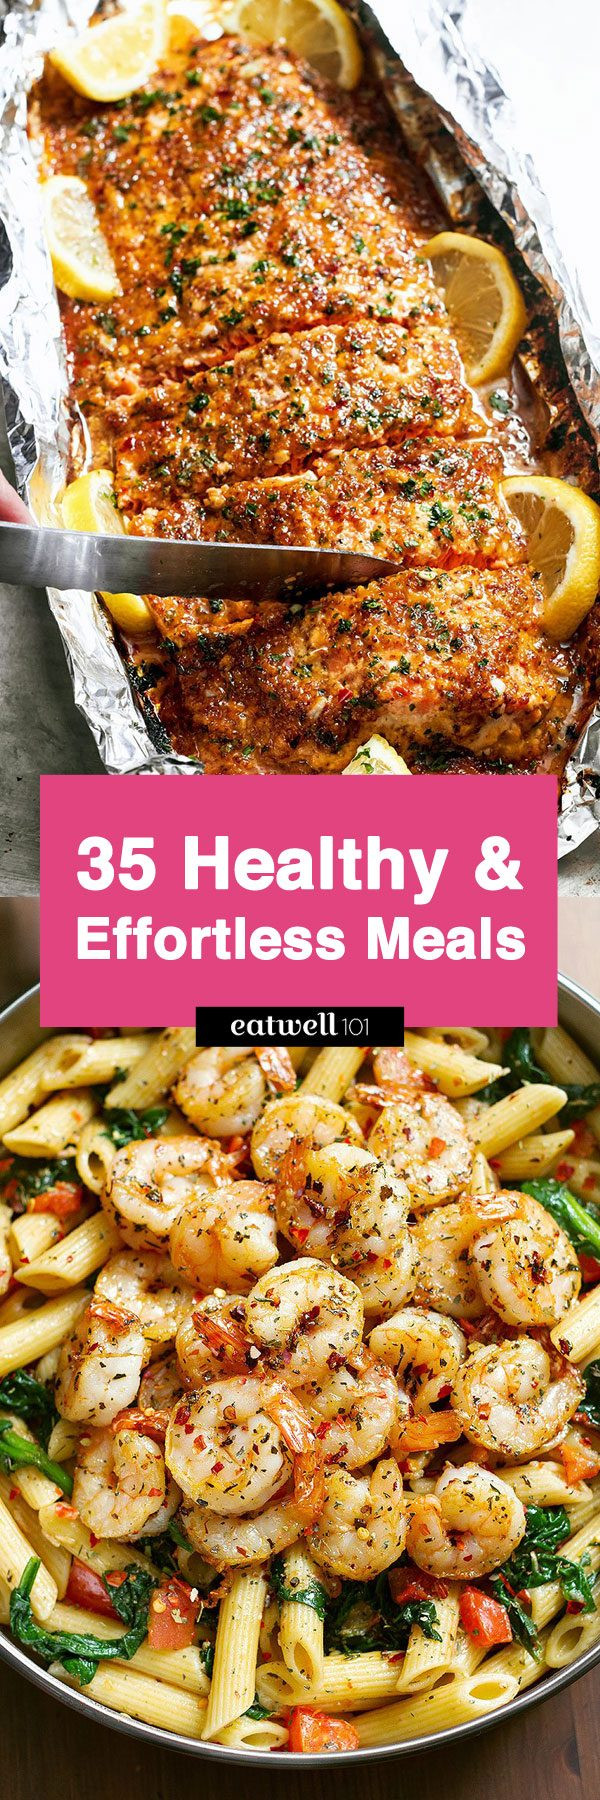 Easy Healthy Dinners For Two
 Easy Healthy Dinner Ideas 48 Low Effort and Healthy